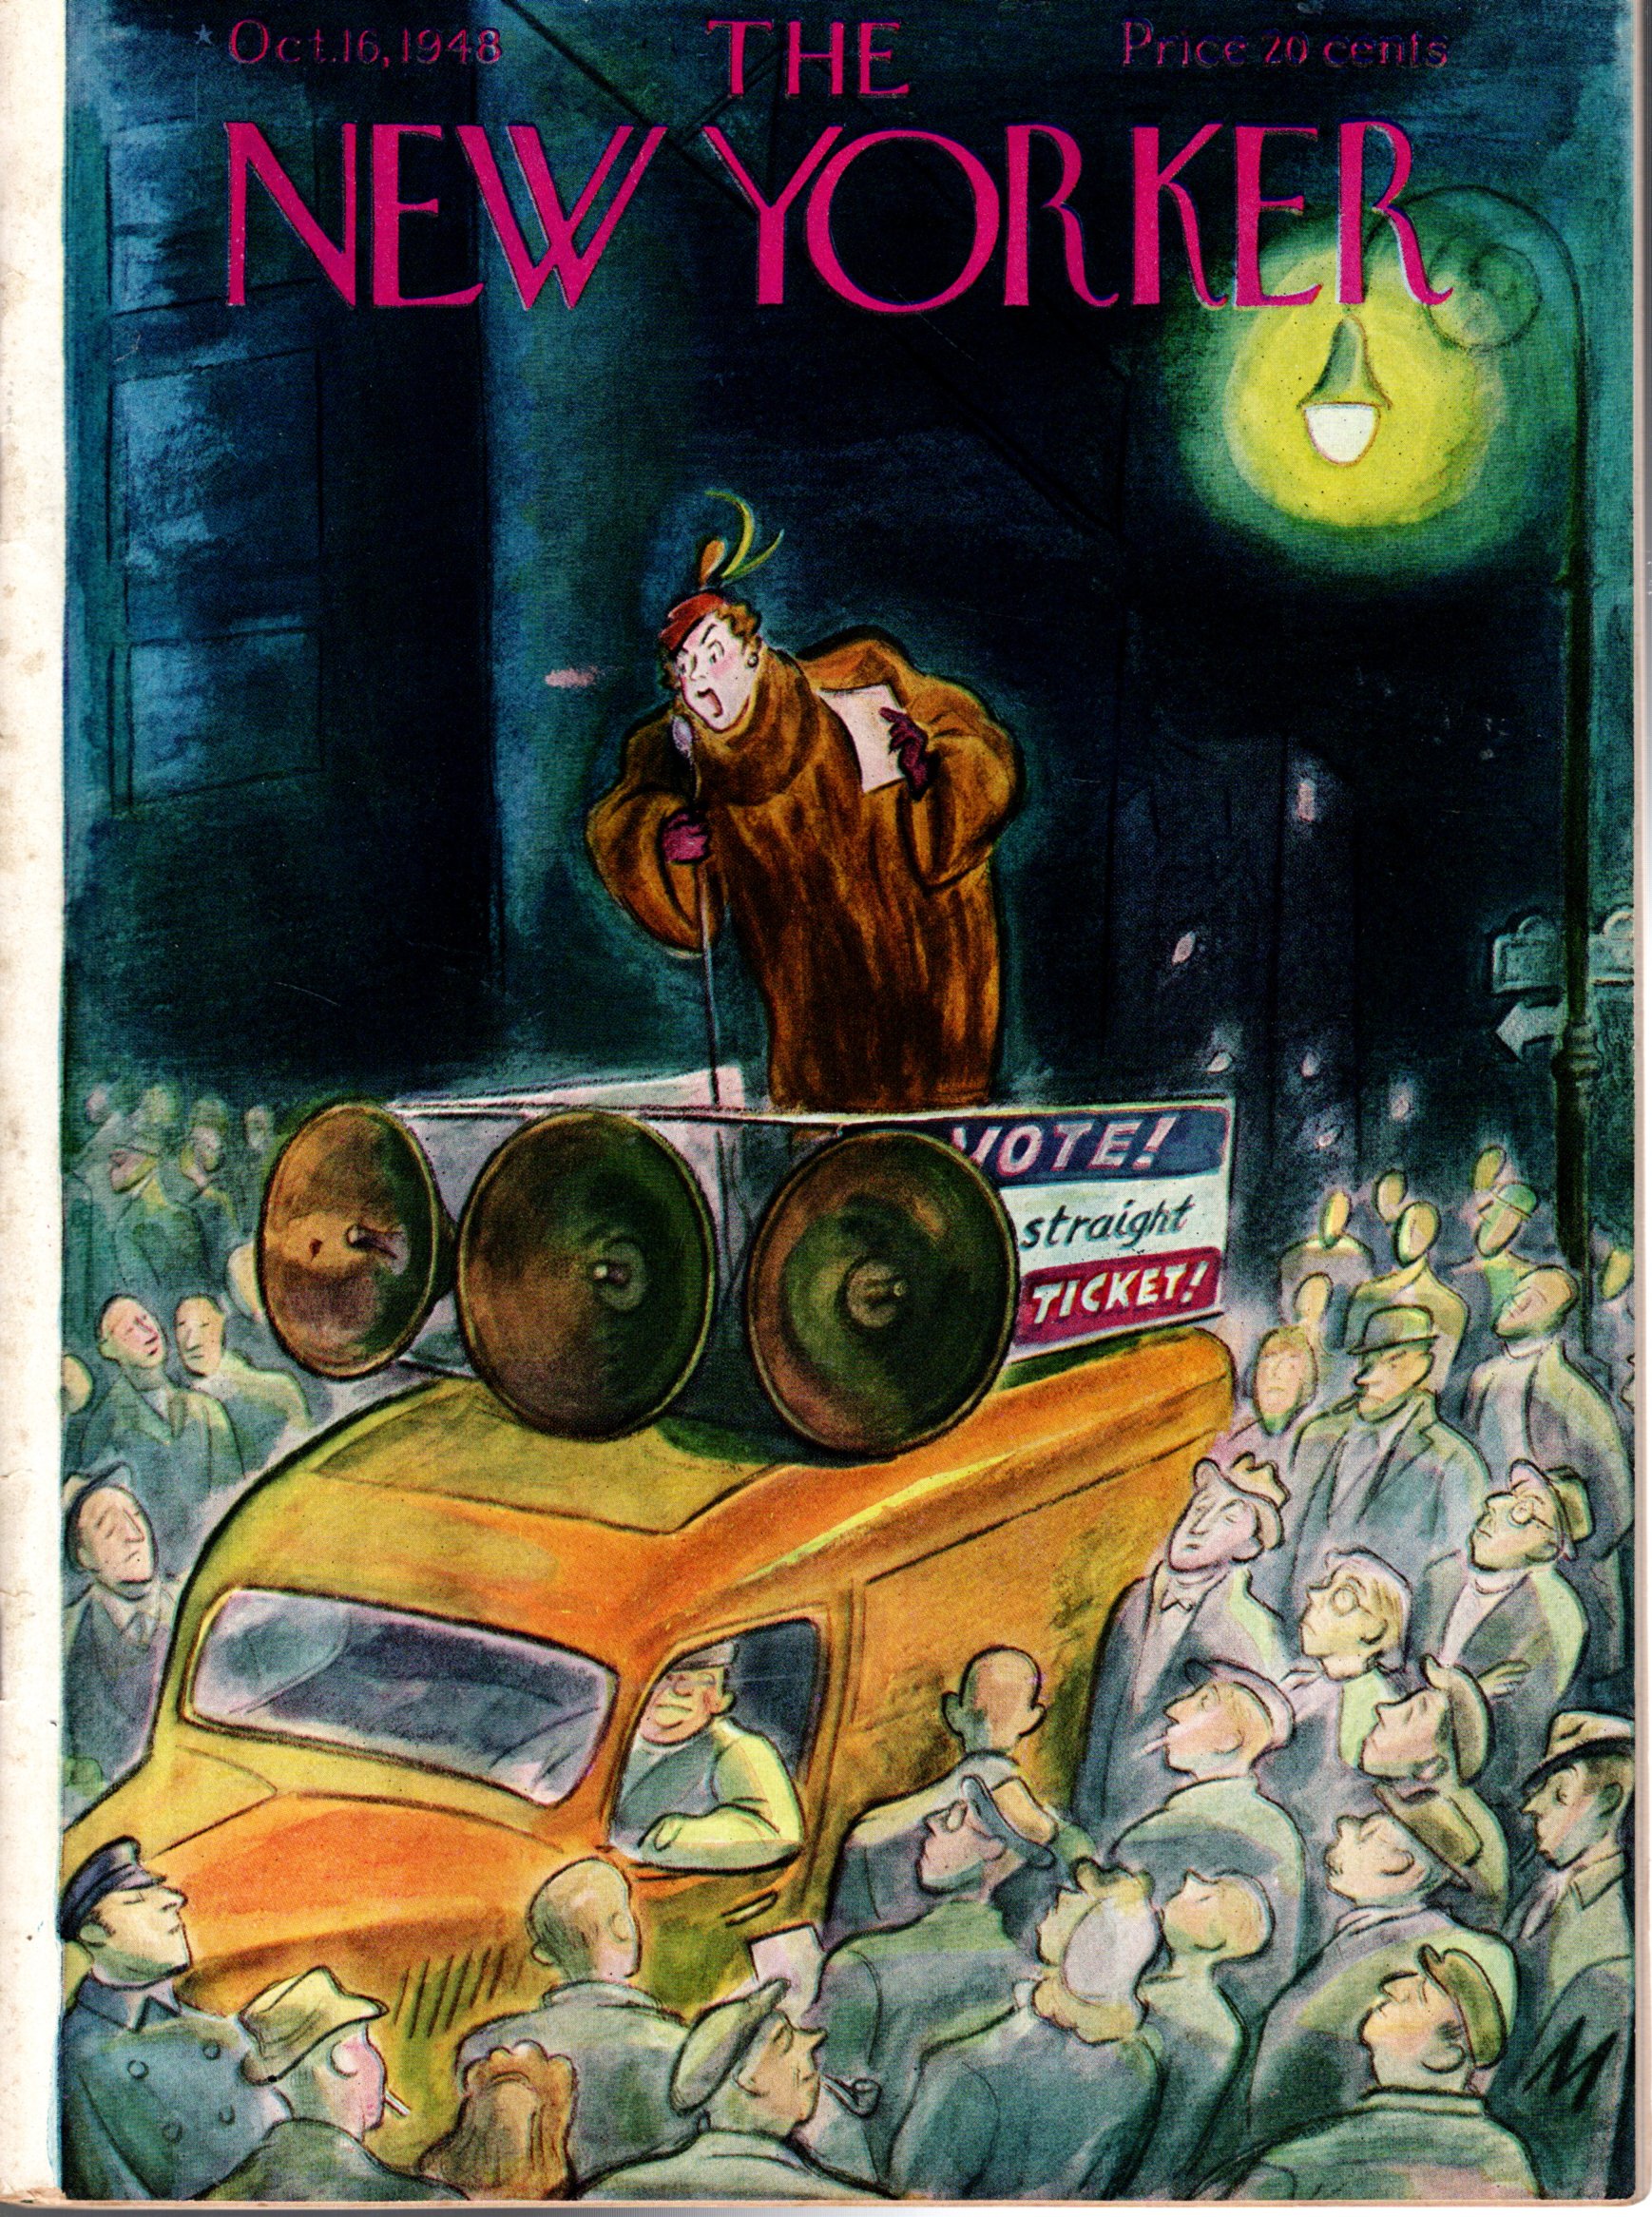 The New Yorker Magazine, October 16. 1948 by Ross, Harold (editor ...